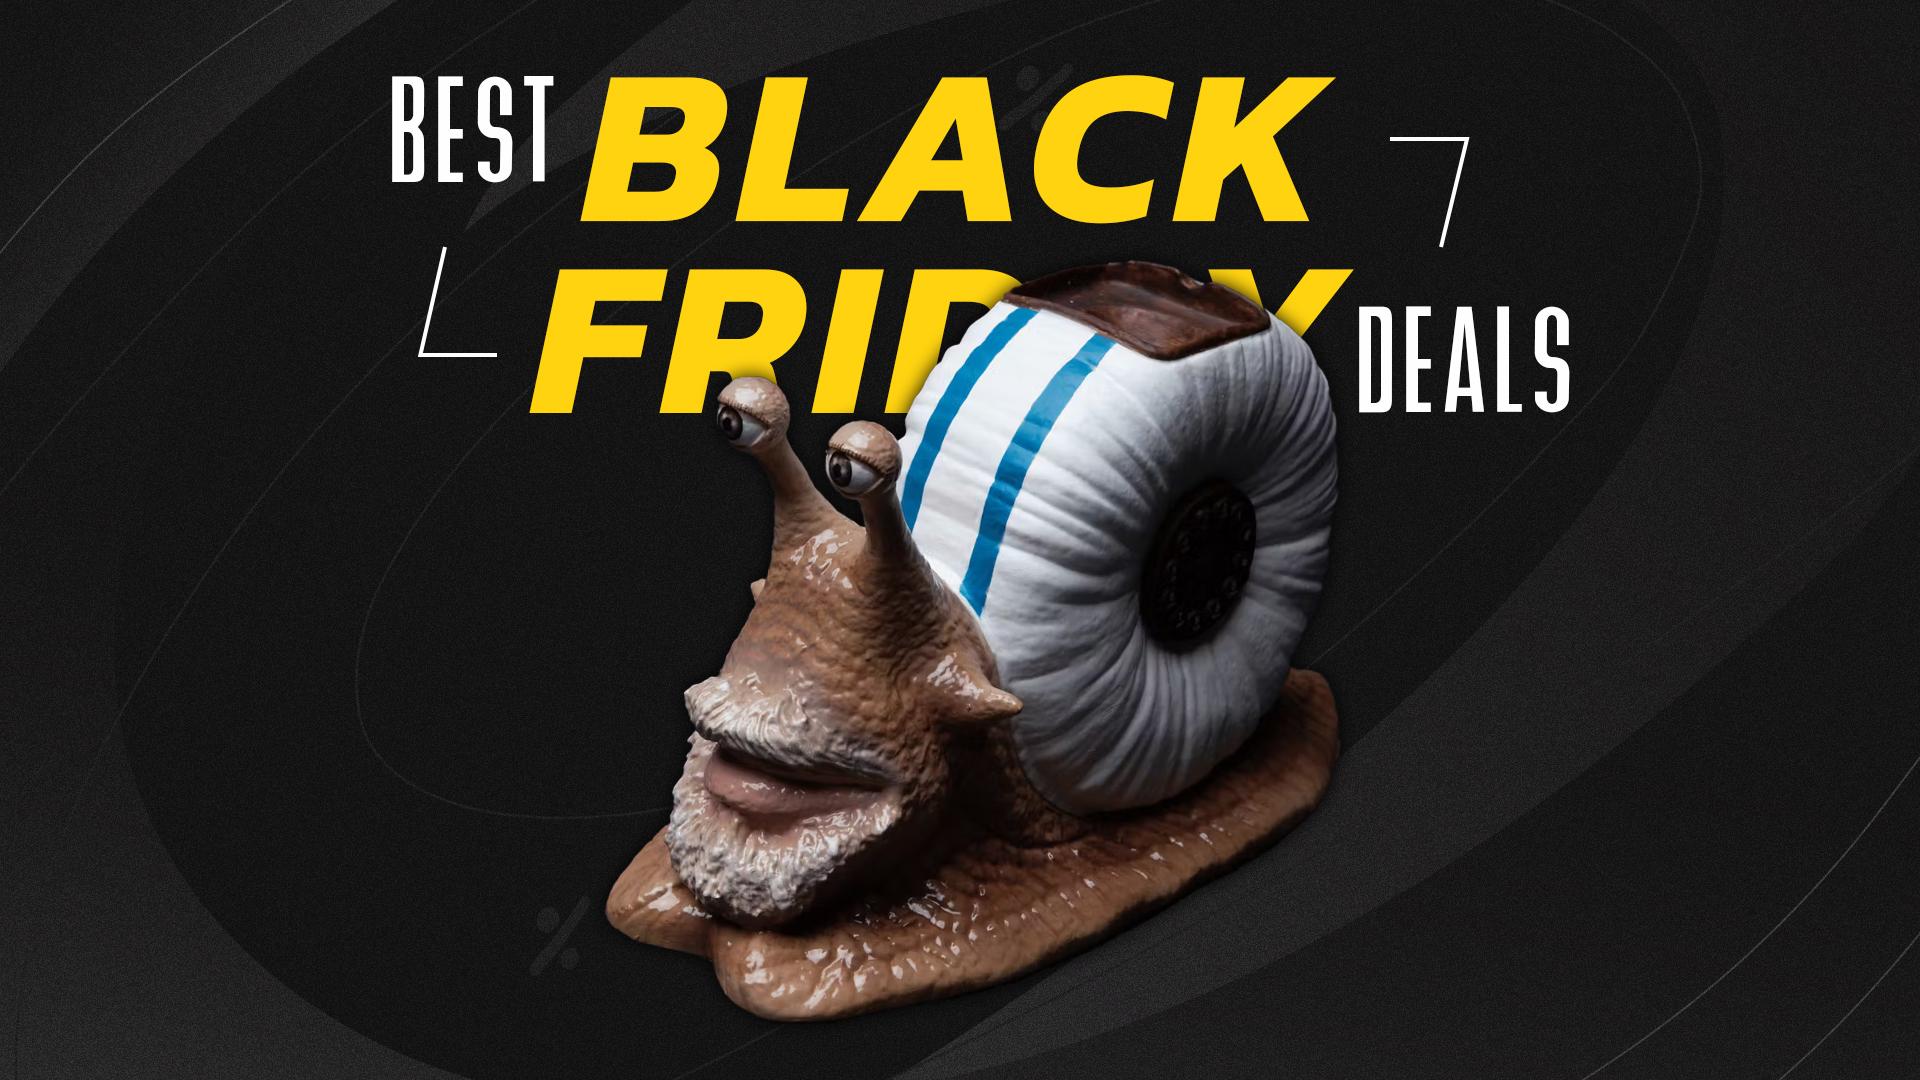 snail phone from one piece in front of black friday branding